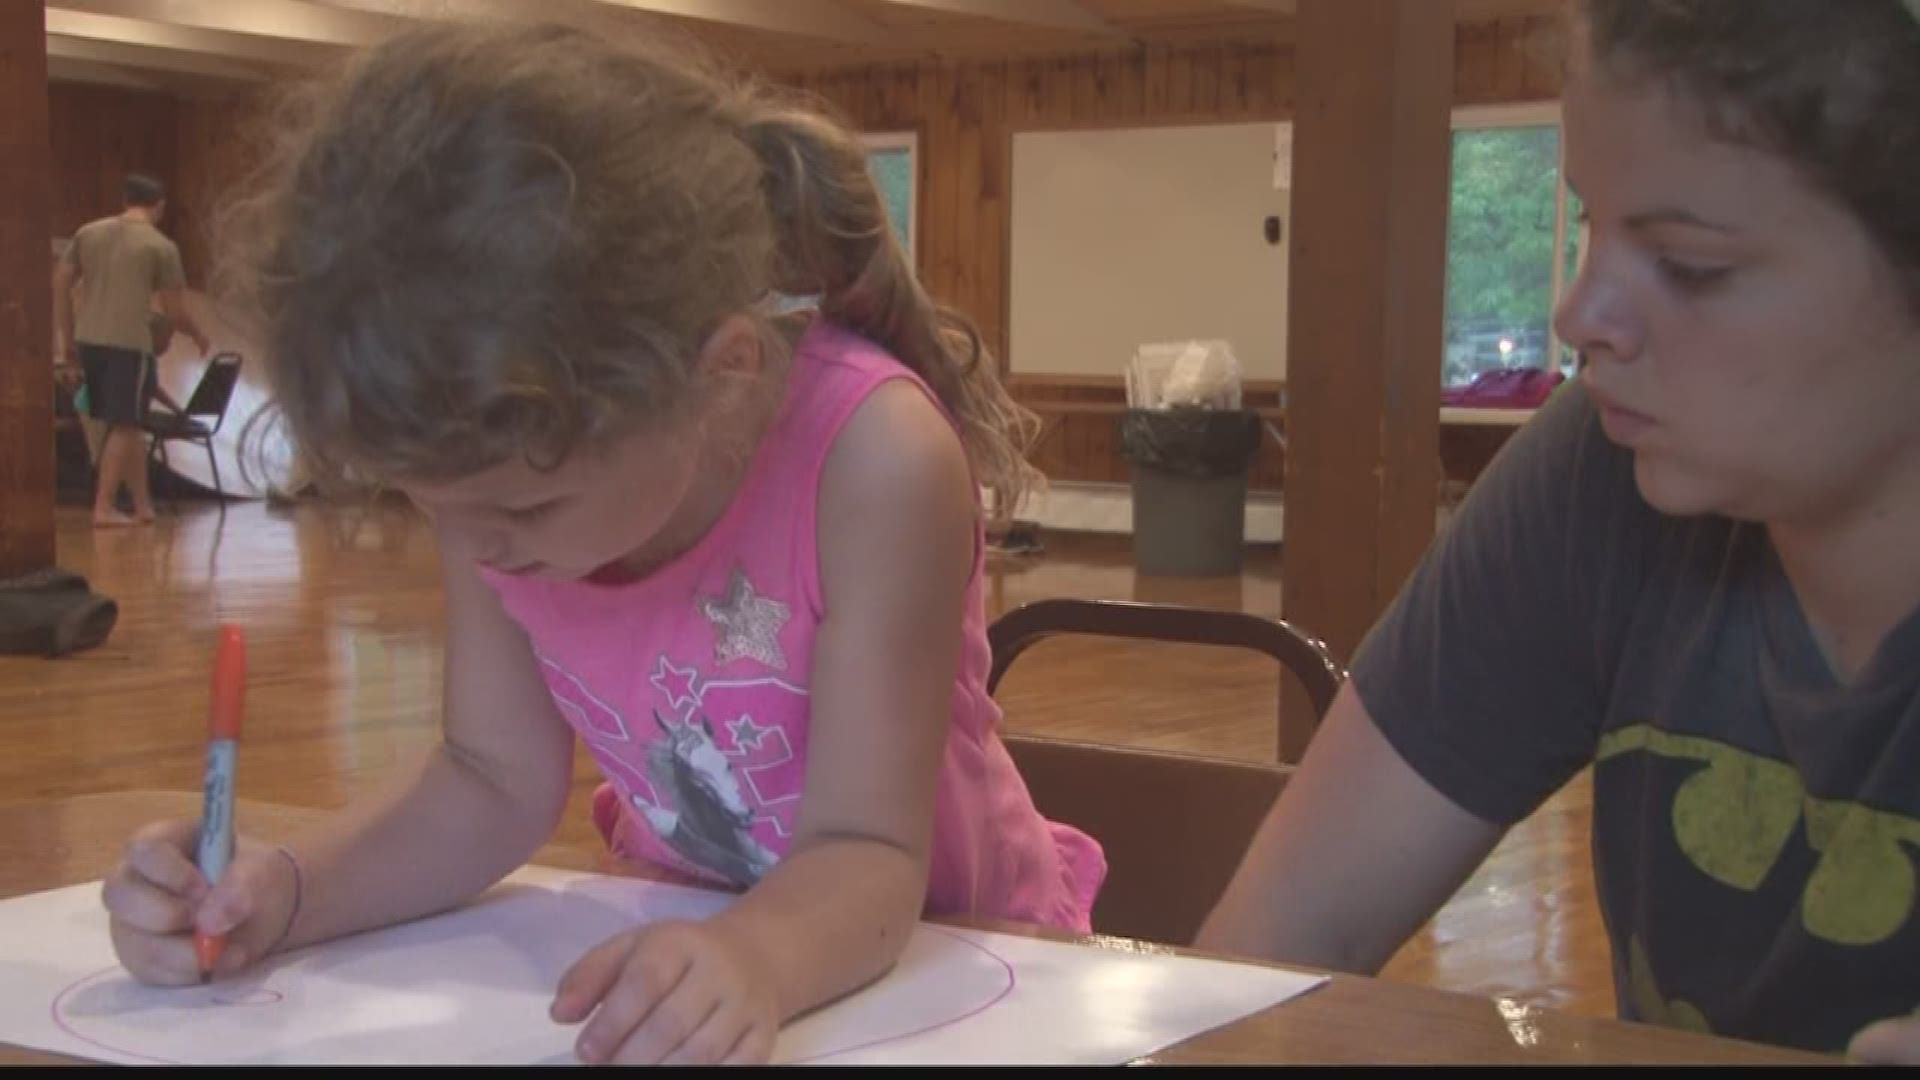 Kids from military families help each other through difficult times at Operation Purple Camp.